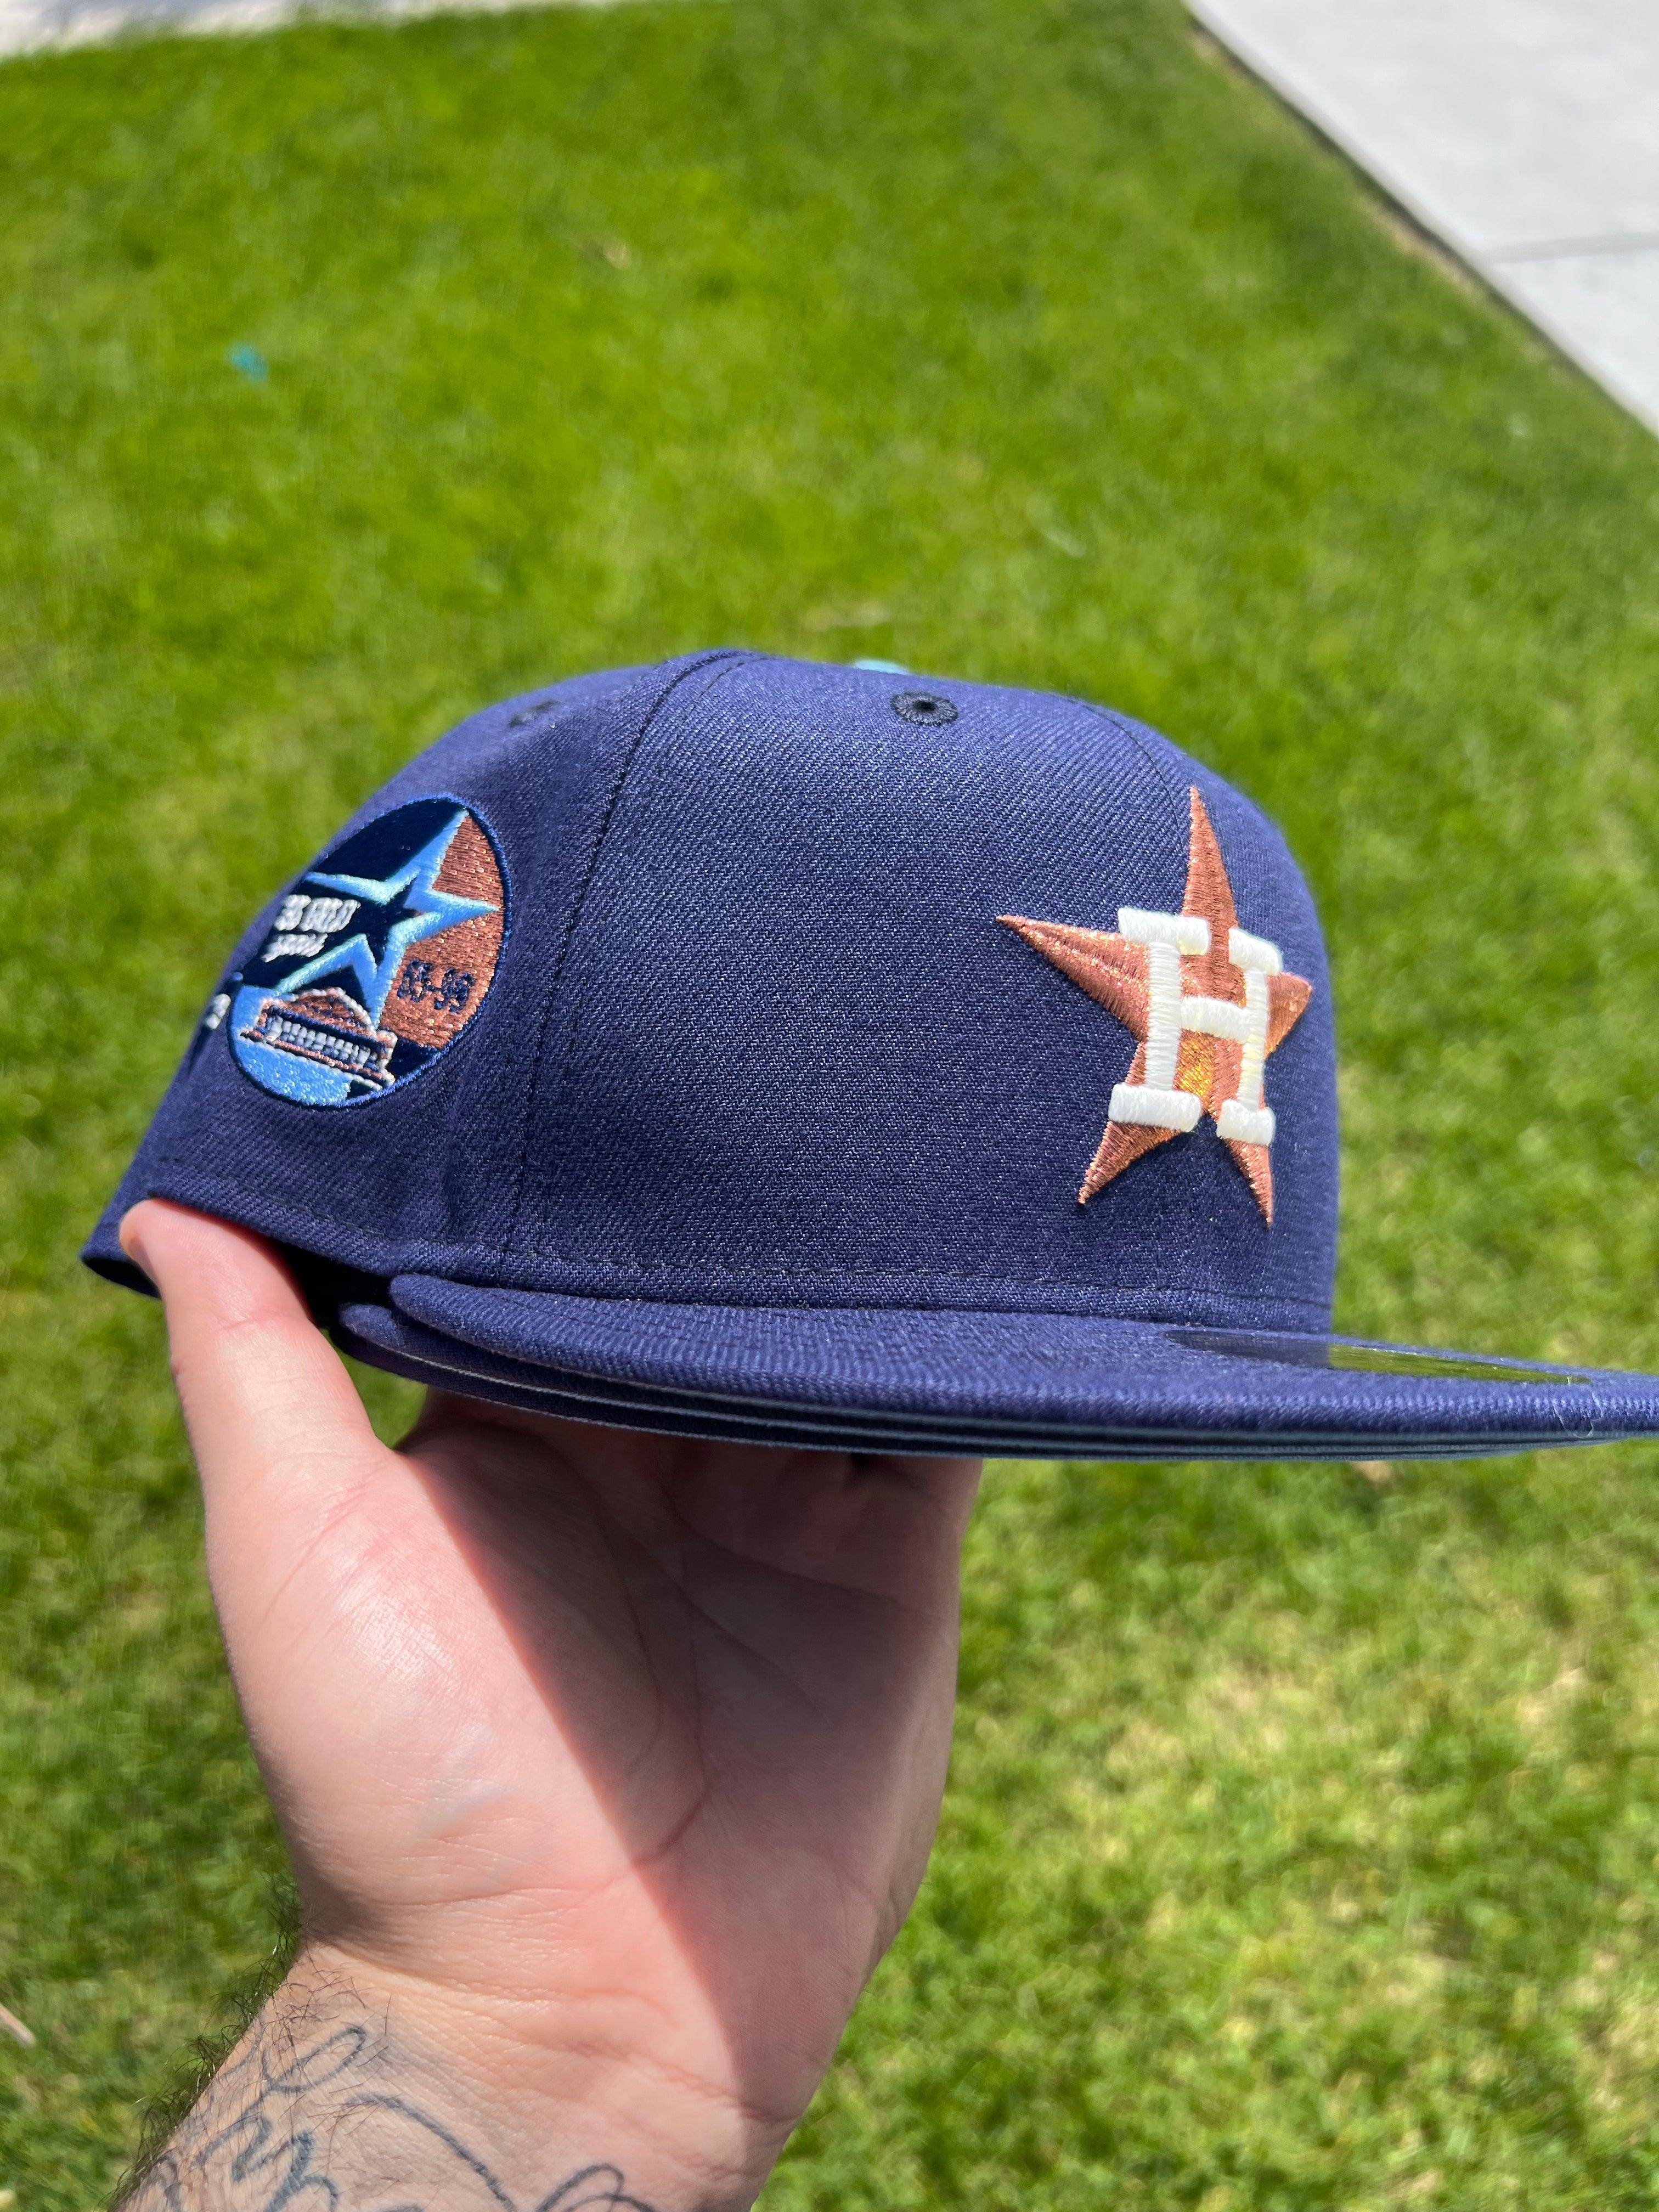 Astros blue/baby blue New Era Fitted Hat